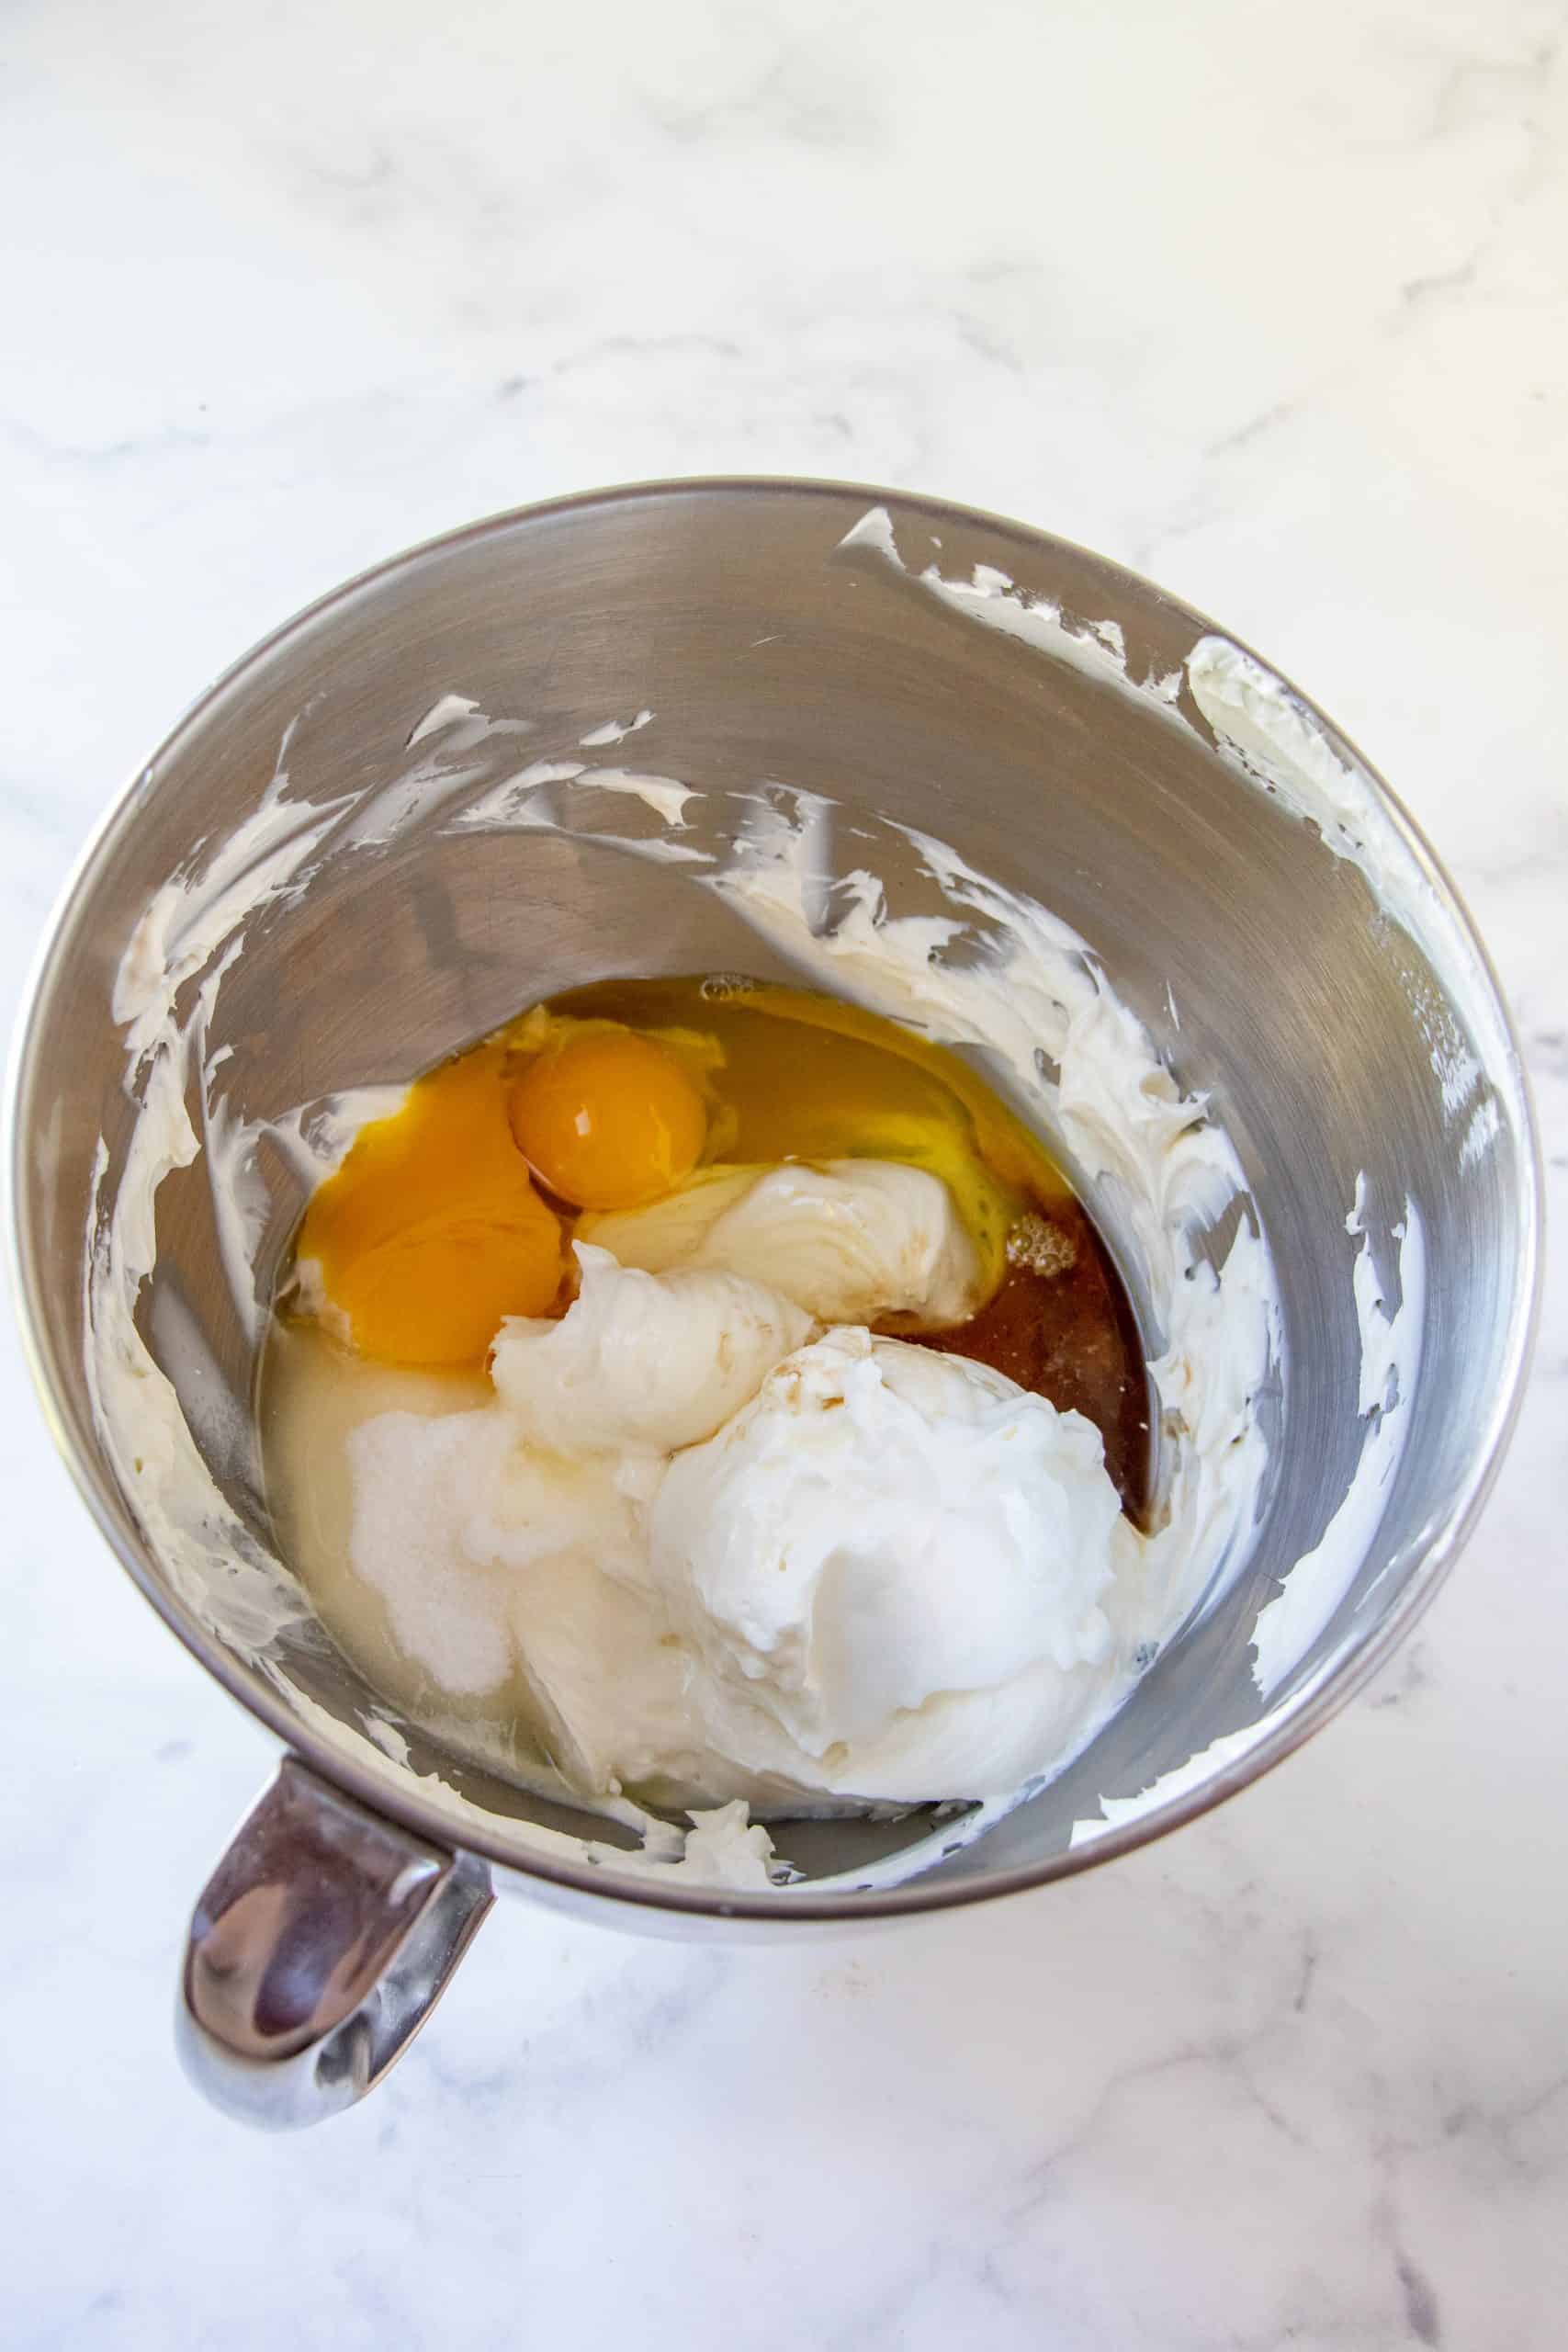 eggs, sour cream and vanilla extract added to cream cheese in a bowl.